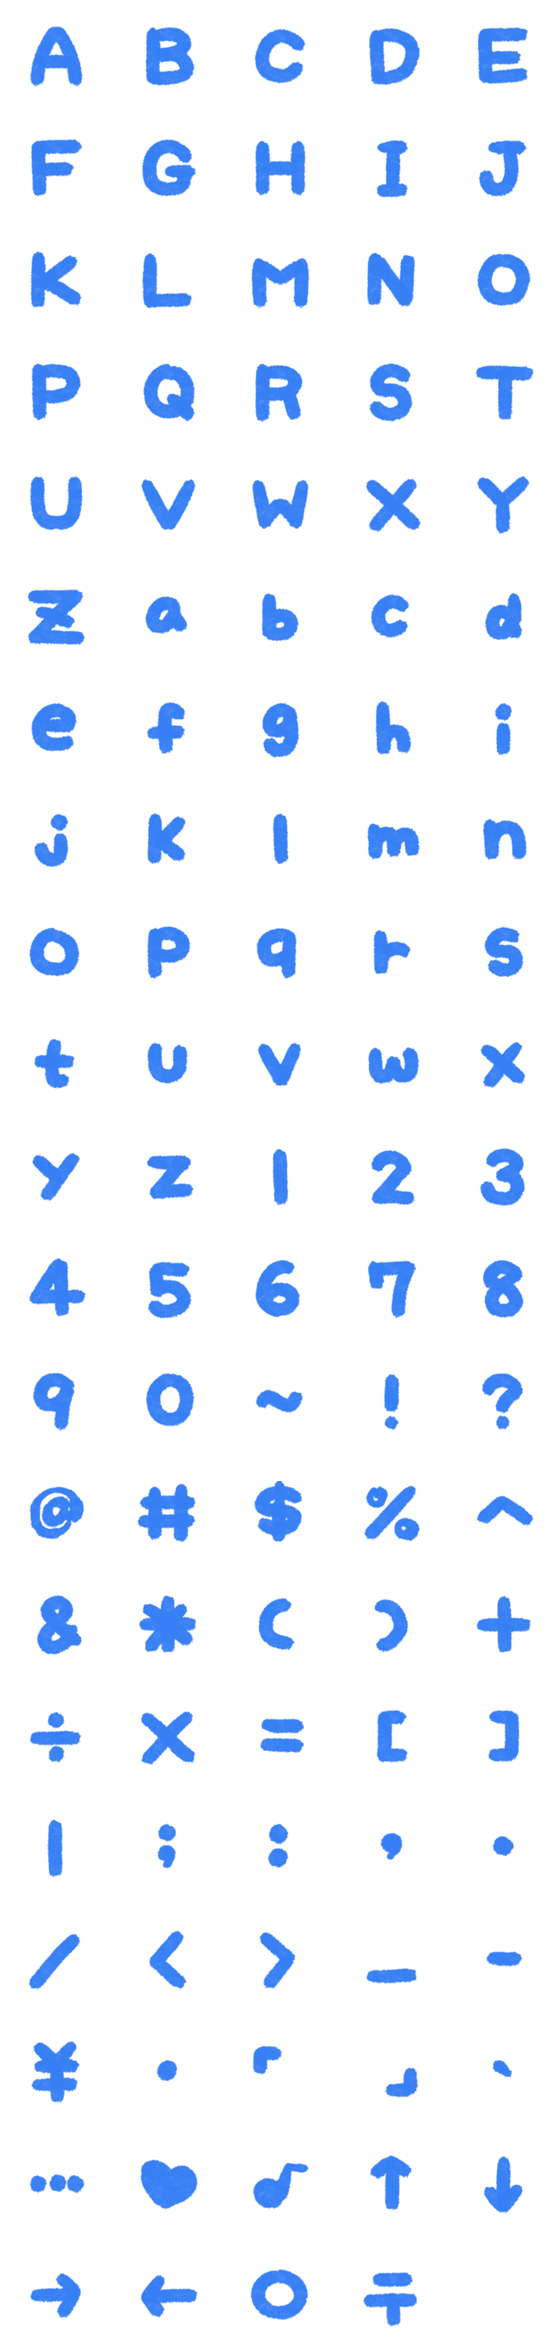 [LINE絵文字]SOCIAL BUBBLE Letter number symbols2の画像一覧